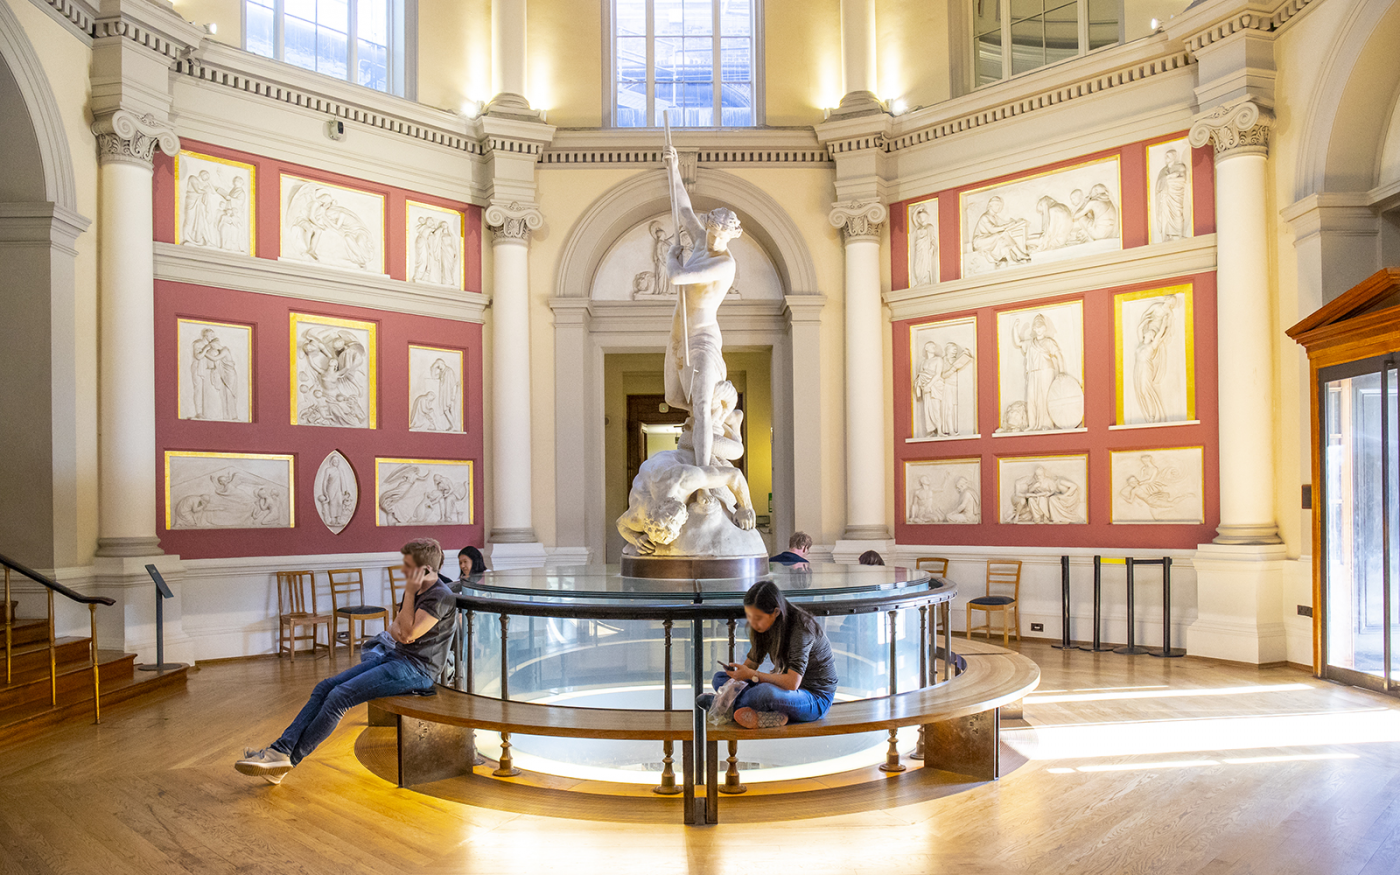 The Flaxman Gallery situated beneath the UCL Dome with students sitting